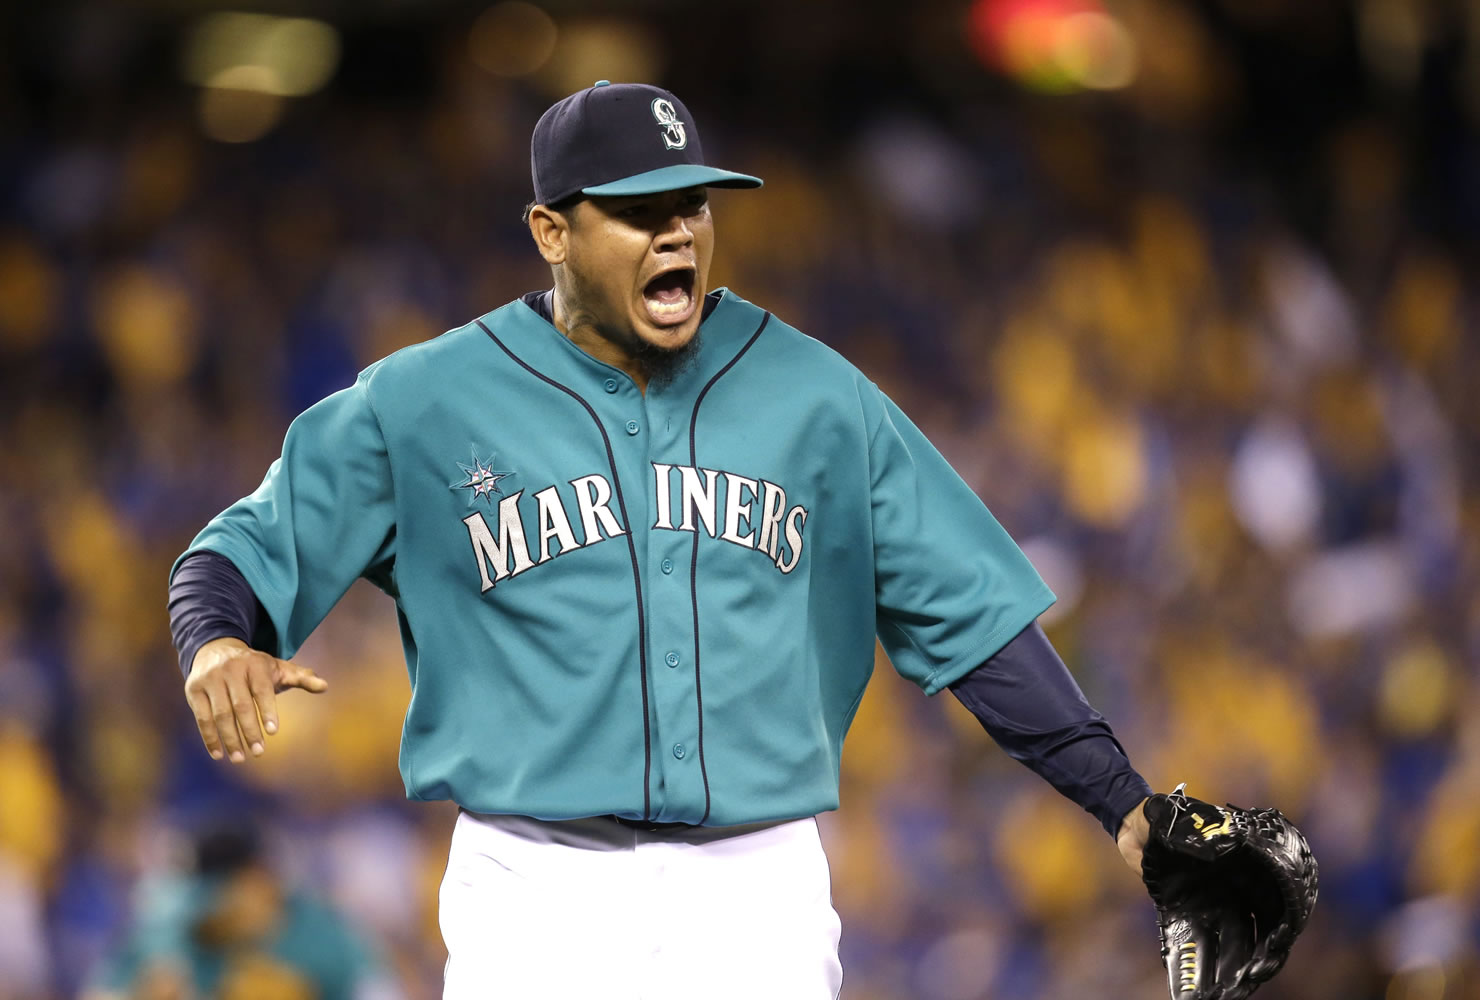 Seattle Mariners starting pitcher Felix Hernandez yells after the final out of the eighth inning against the Houston Astros on Friday. Hernandez left at the end of that inning, after fielding a grounder from Dexter Fowler to start a double play.